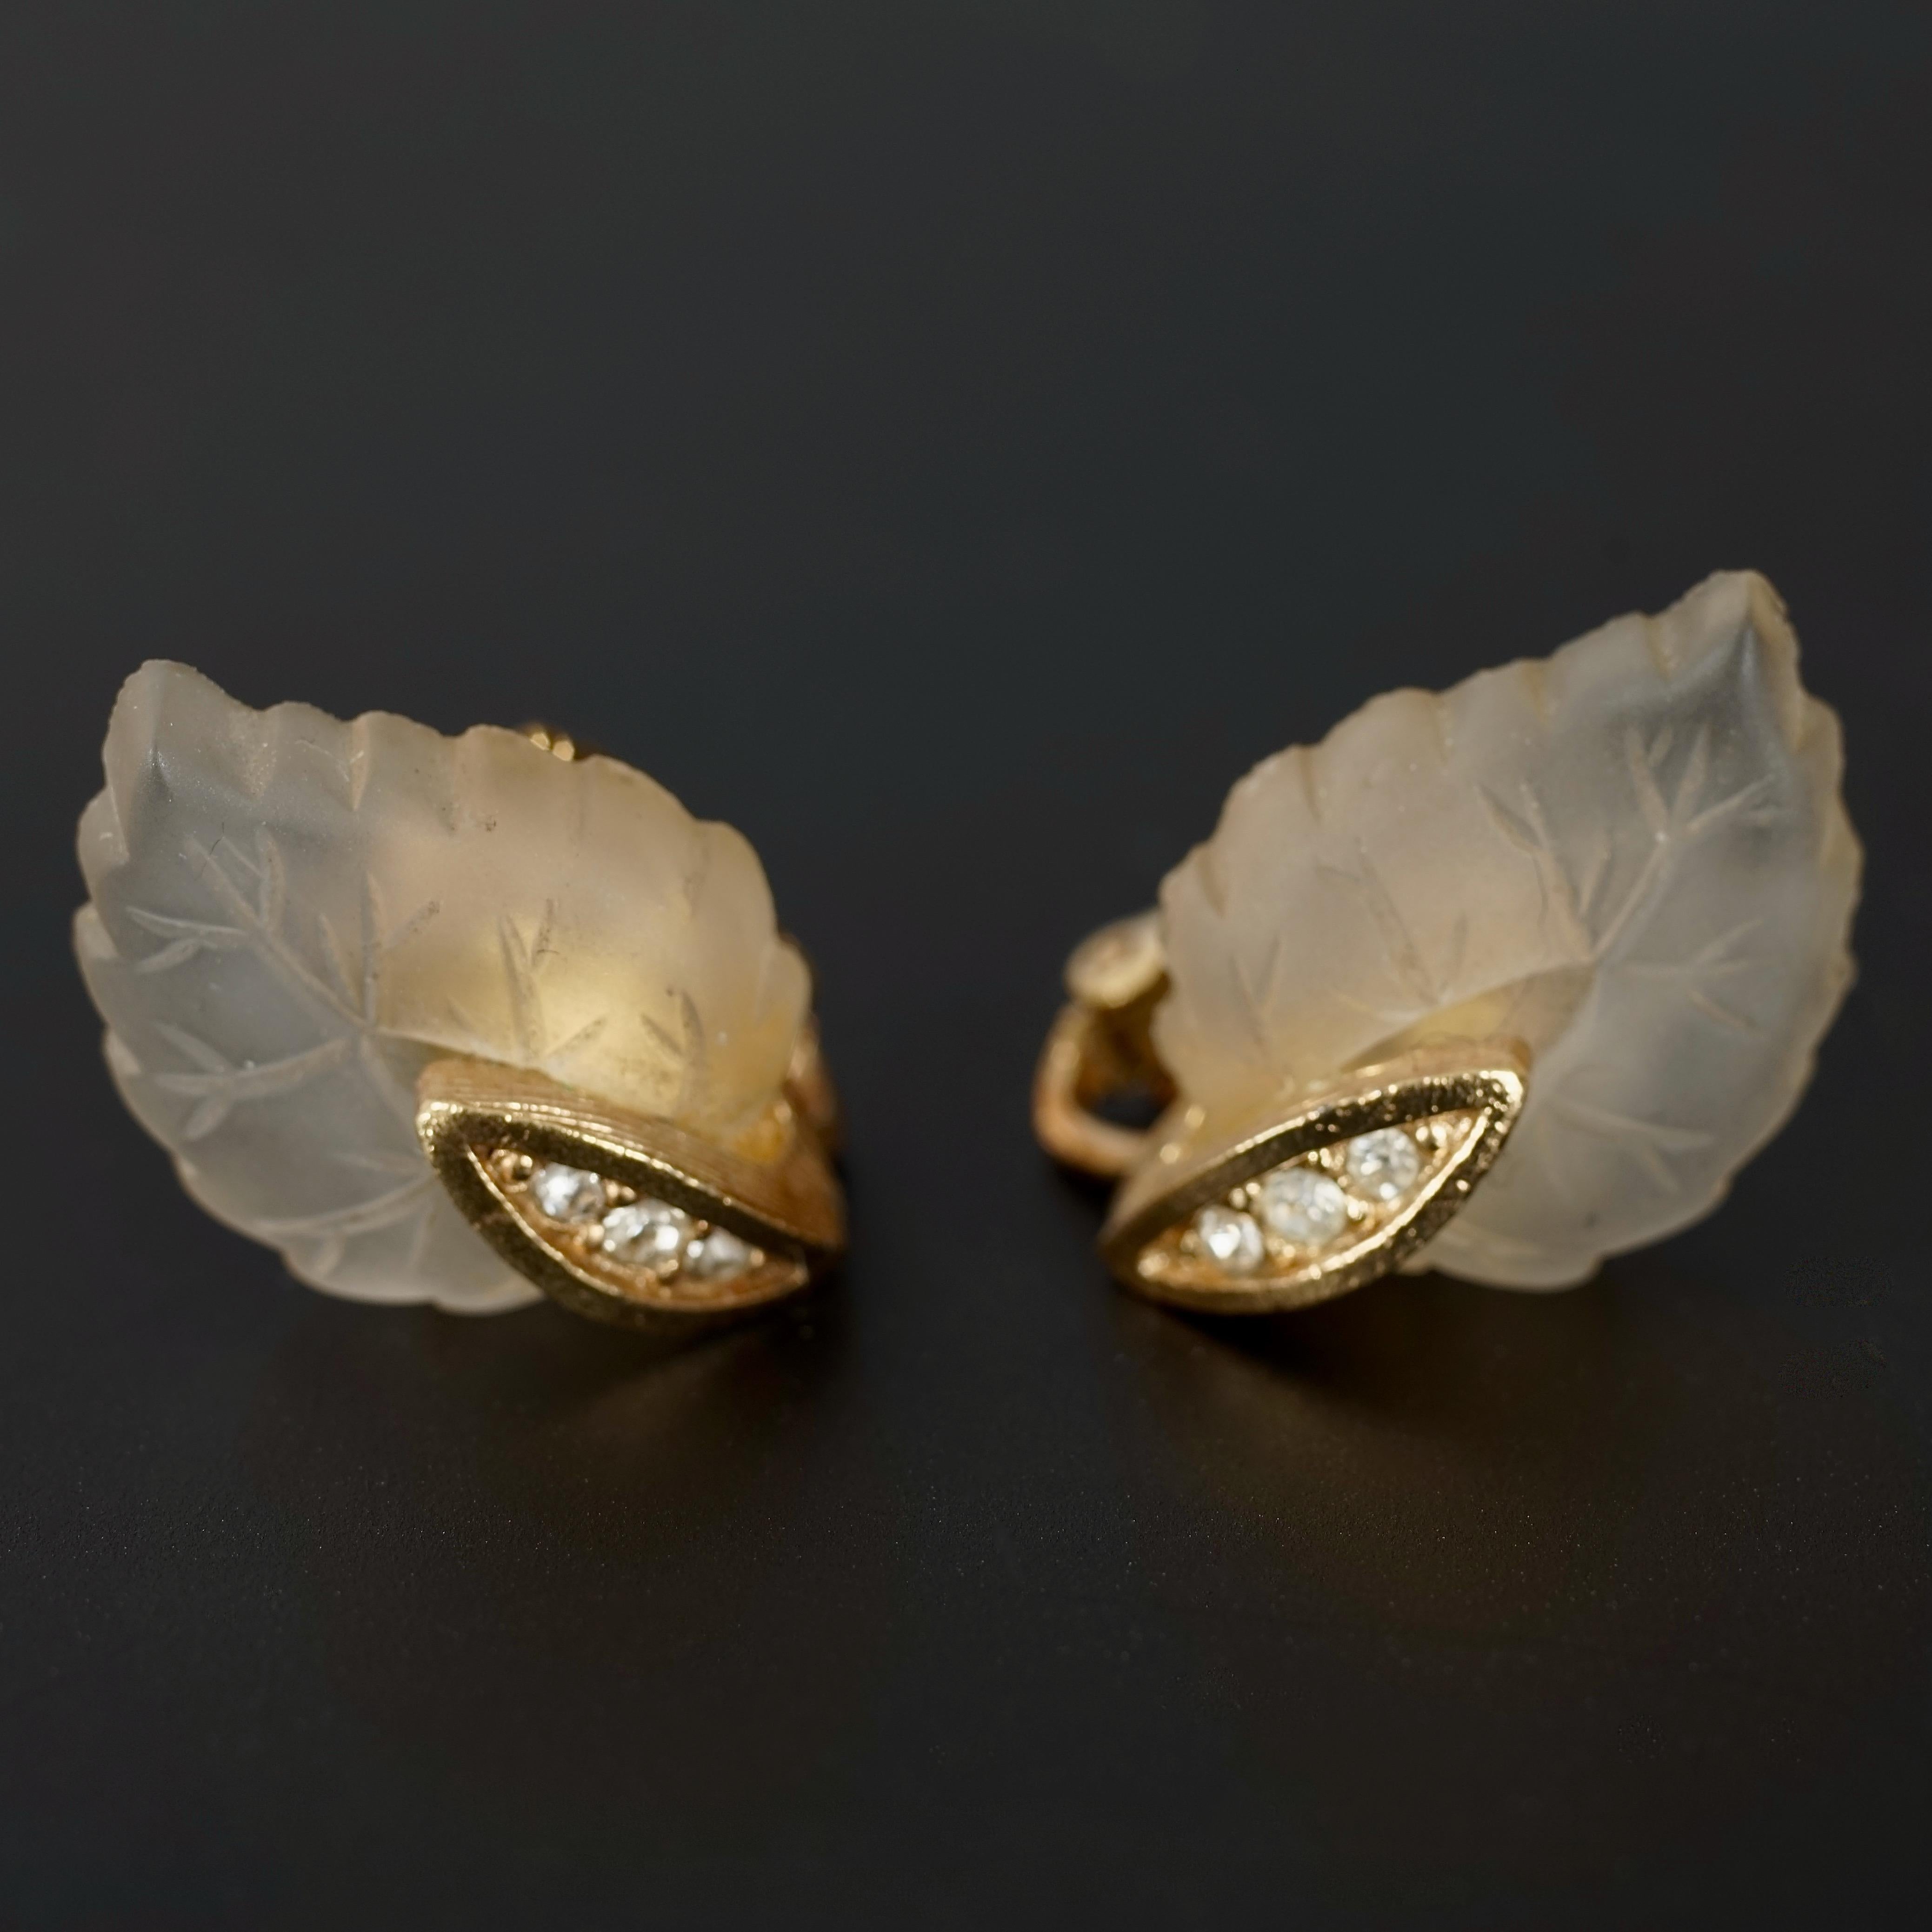 Vintage CHRISTIAN DIOR Frosted Glass Leaf Earrings

Measurements:
Height:  0.83 inch (2.1 cm)
Width: 0.55 inch (1.4 cm)
Weight per Earring: 4 grams

Features:
- 100% authentic CHRISTIAN DIOR.
- White frosted glass leaf earrings with rhinestone